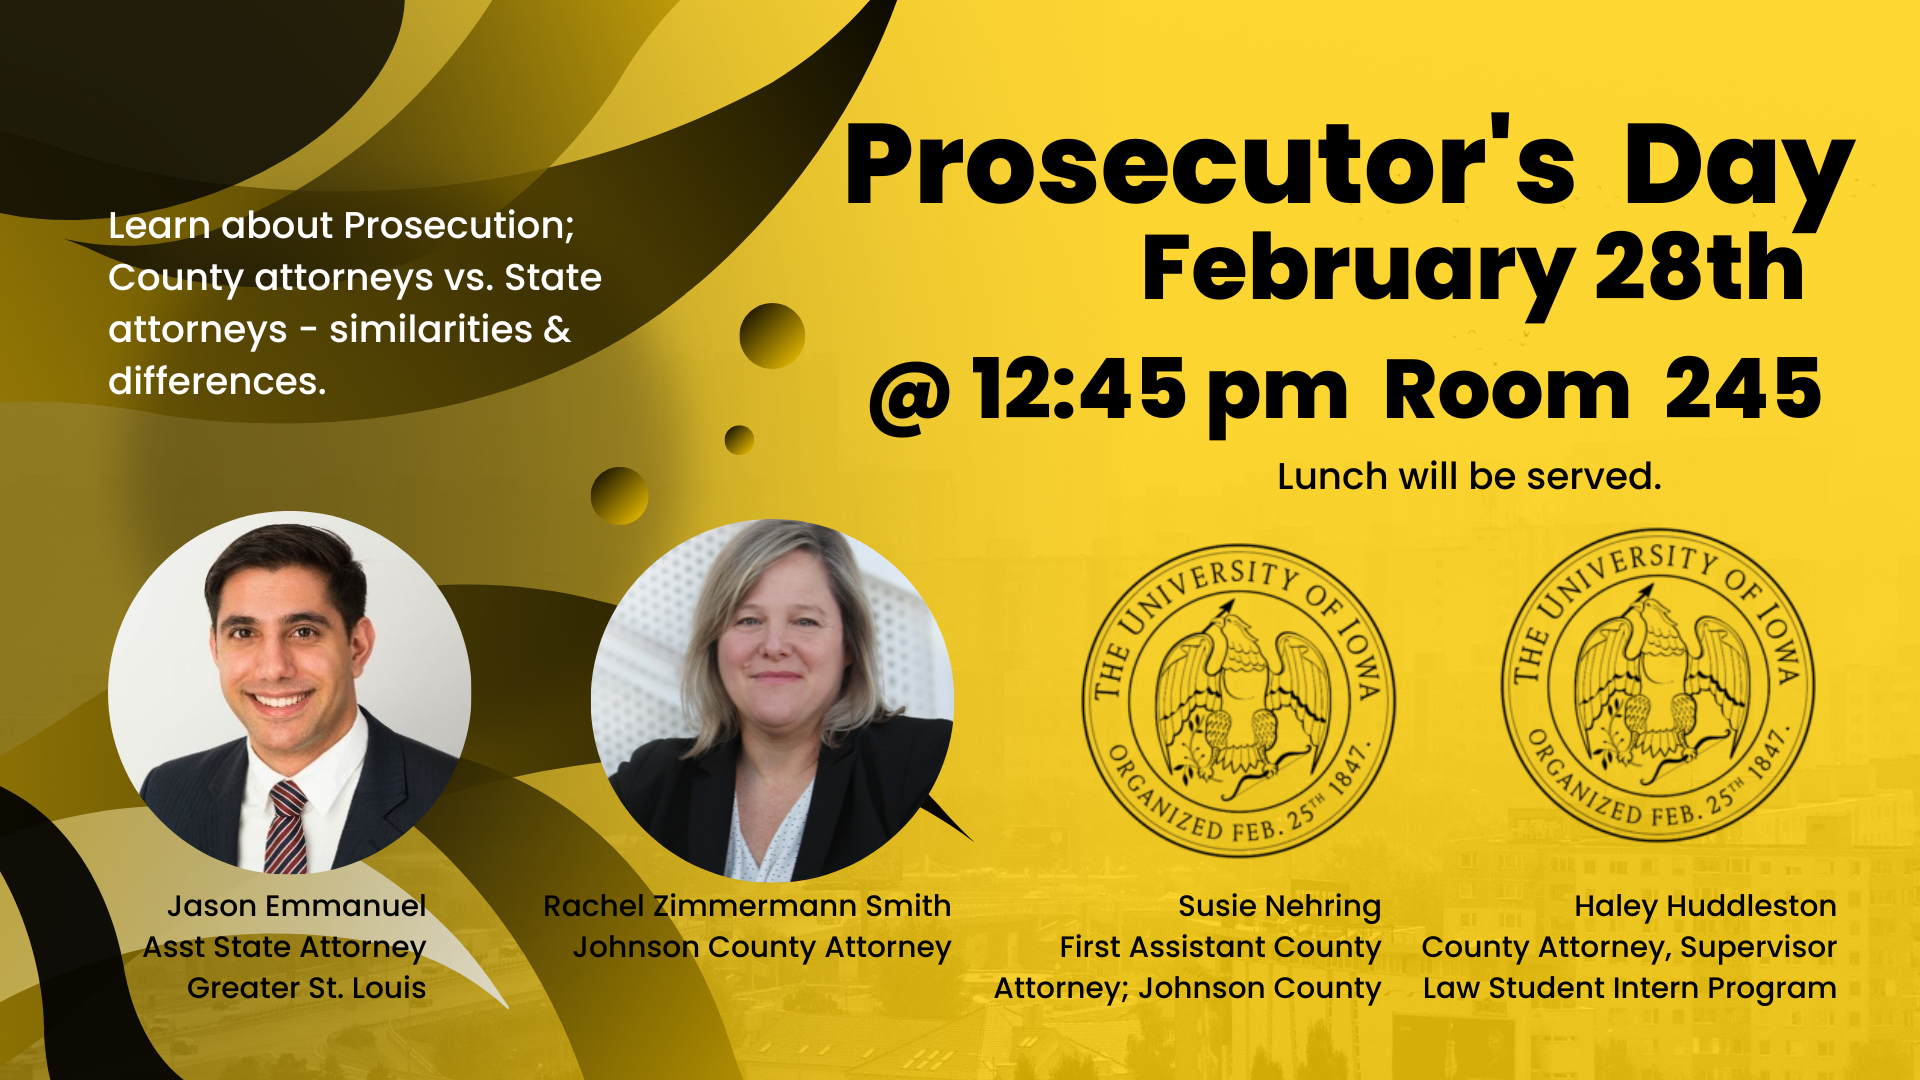 Prosecutor's Day    February 28th    @ 12:45 pm Room 245    Lunch will be served        Learn about Prosecution: County Attorneys vs. State attorneys - similarities & differences.        Jason Emmanuel, Assistant State Attorney, Greater St. Louis    Rachel Zimmermann Smith, Johnson County Attorney    Susie Nehring, First Assistant County Attorney;p Johnson County    Haley Huddleston, County attorney, Supervisor Law Student Intern Program